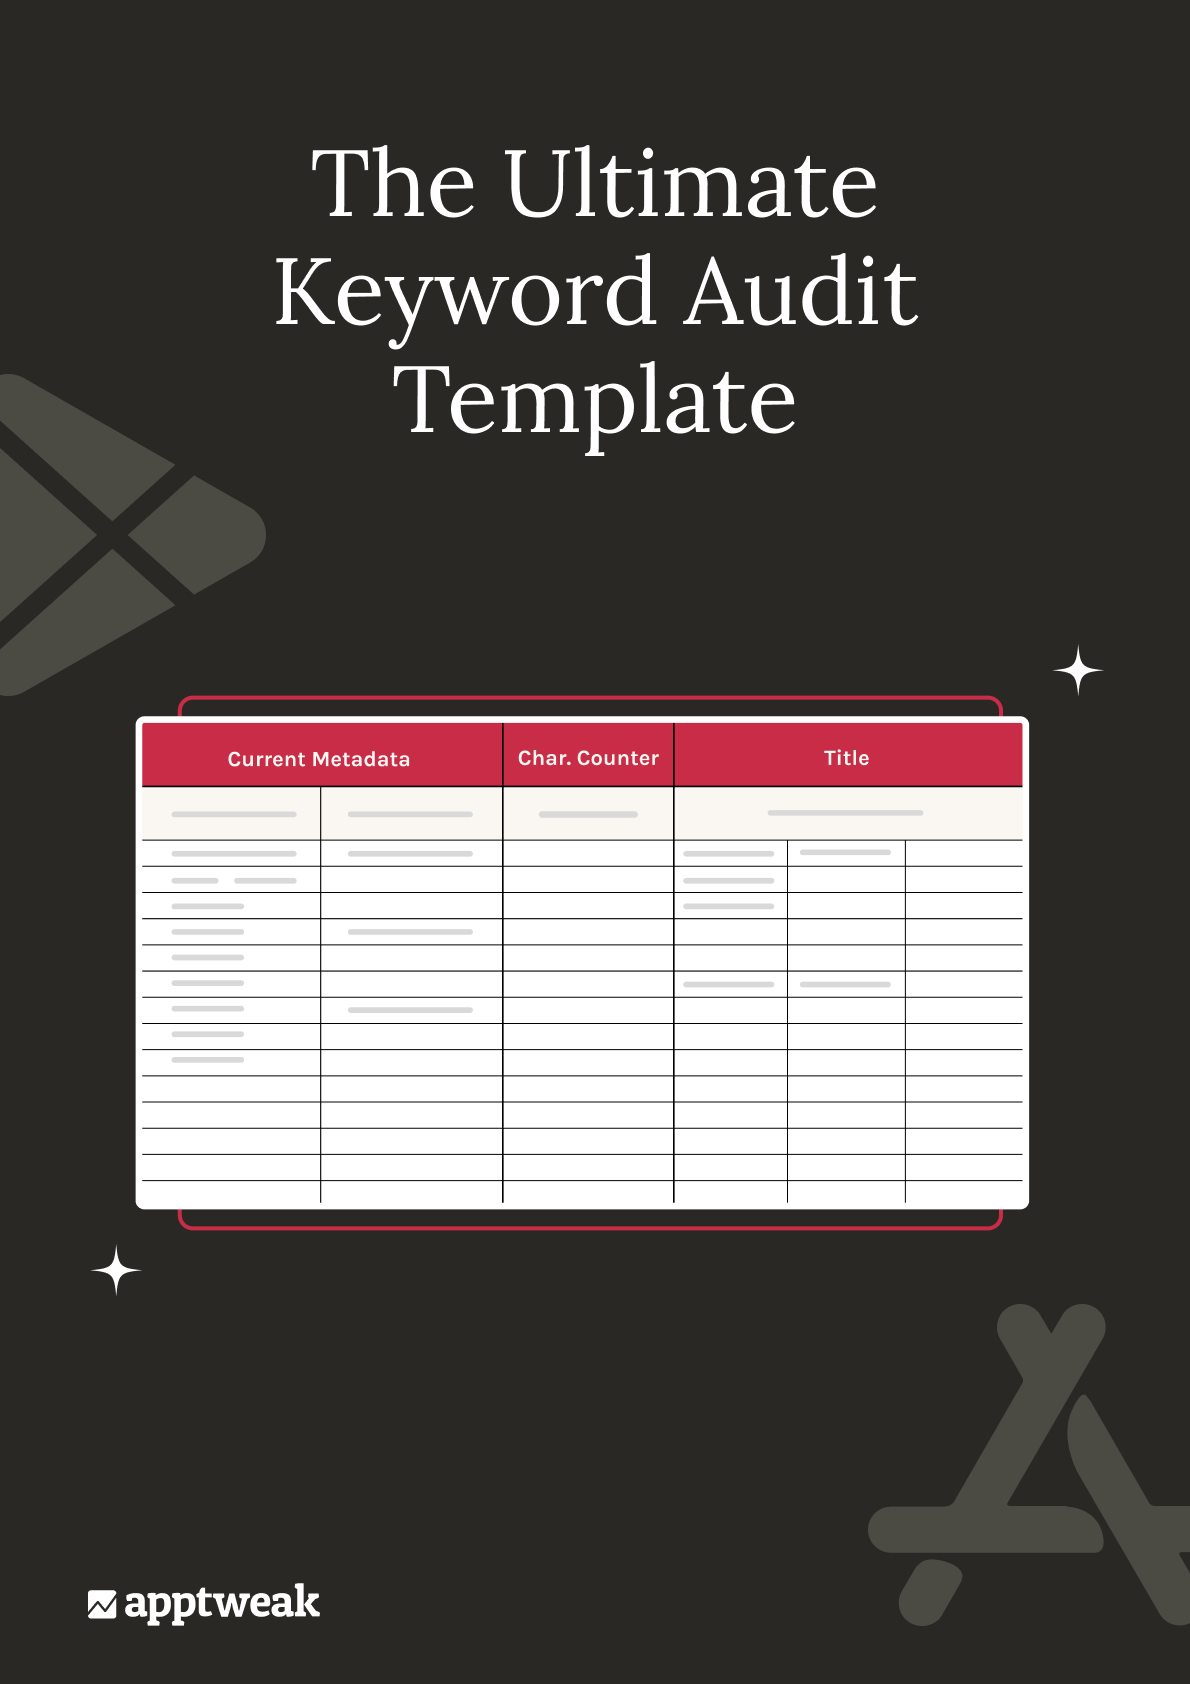 Image - The Ultimate Keyword Audit Template - guide cover